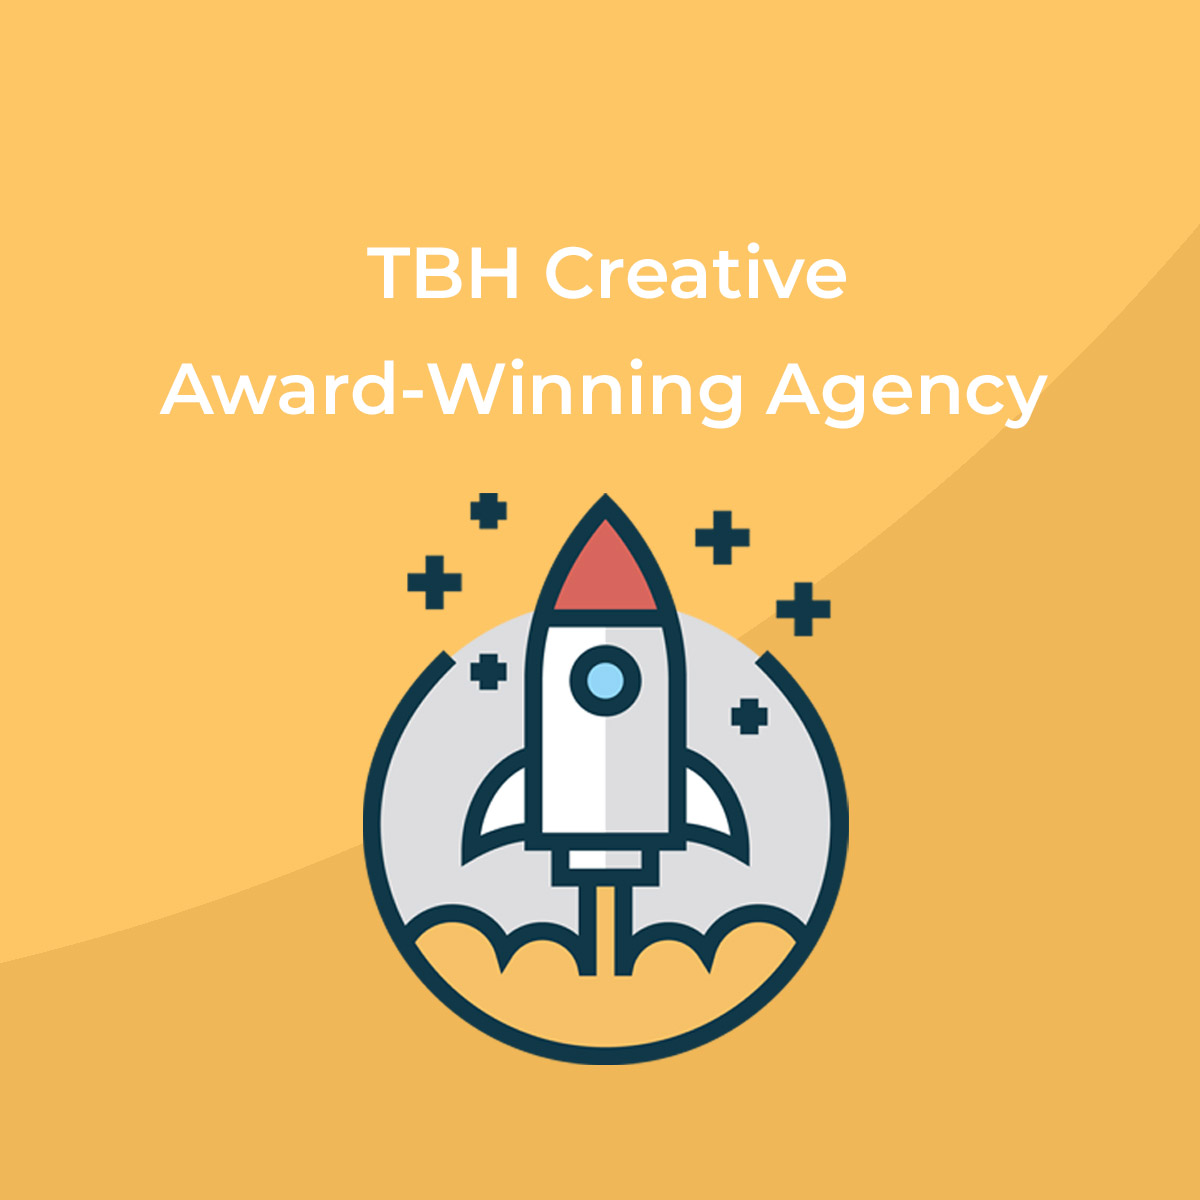 TBH Creative Award-Winning Agency graphic with rocket launch illustration